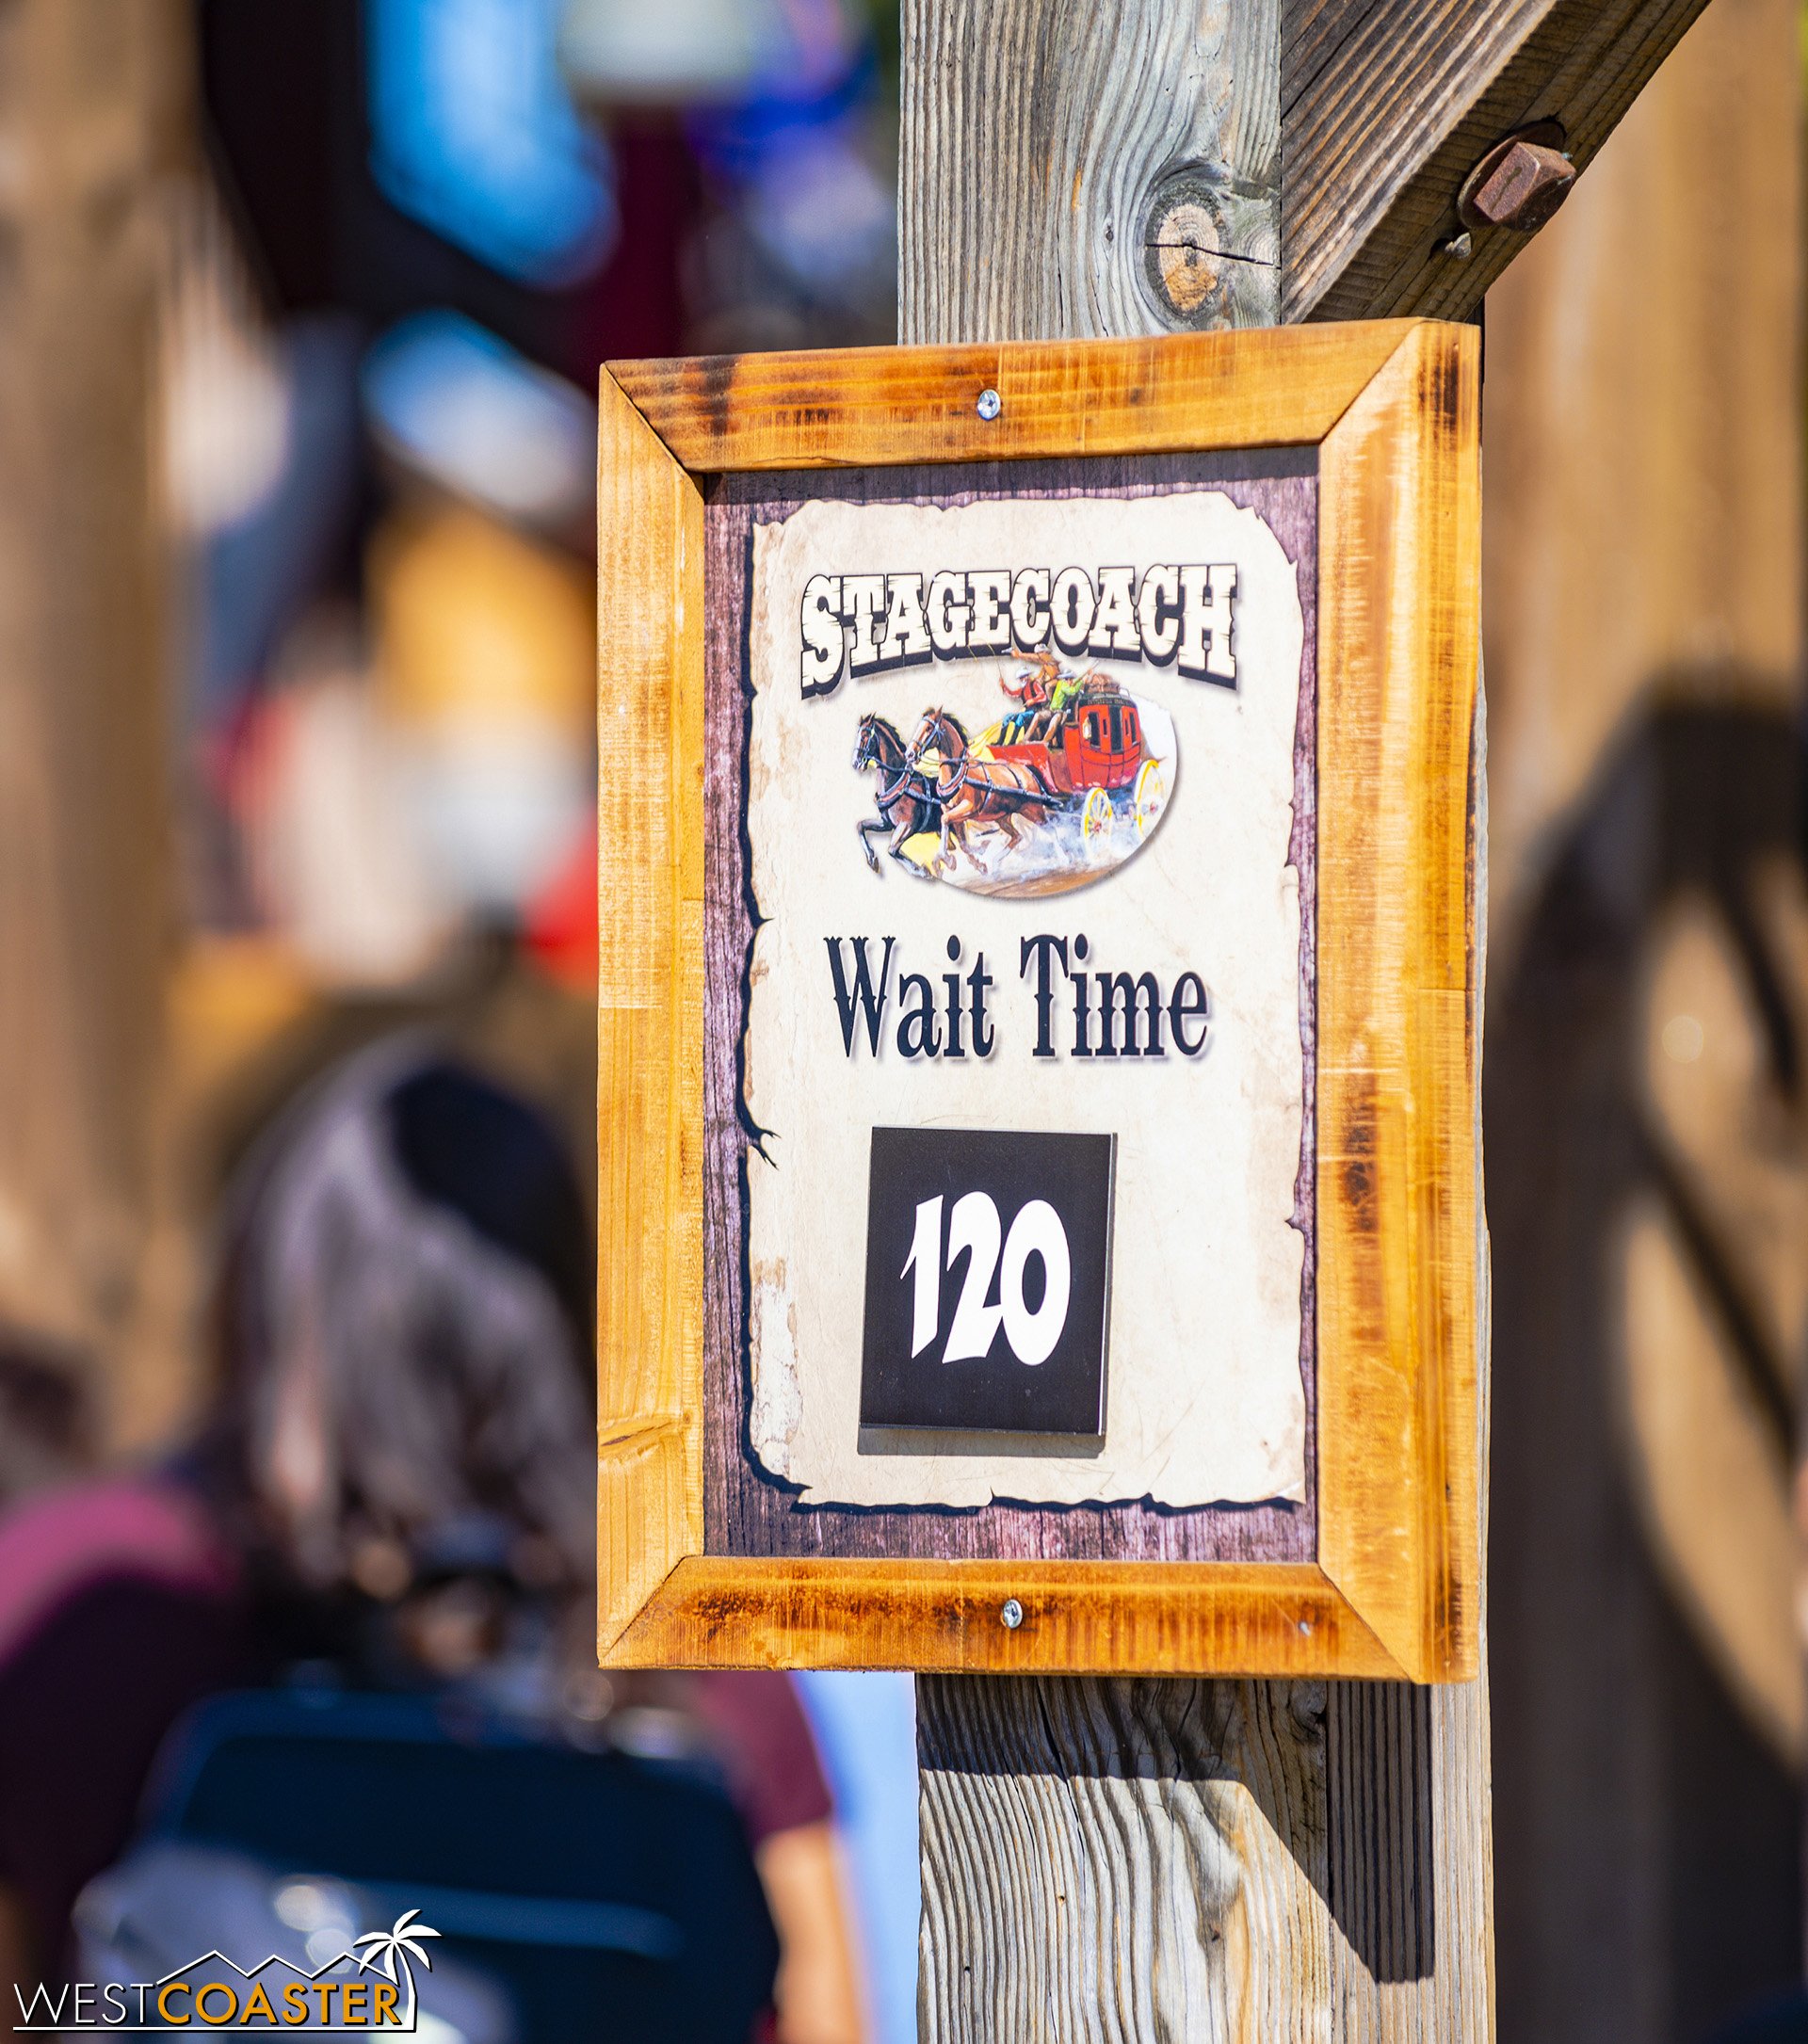  Things have been busy, if this 120 minute wait time for the Stagecoach is any sign.  It’s probably not a full two hours, but when we were at the park this past Saturday, there were plenty of people all around! 